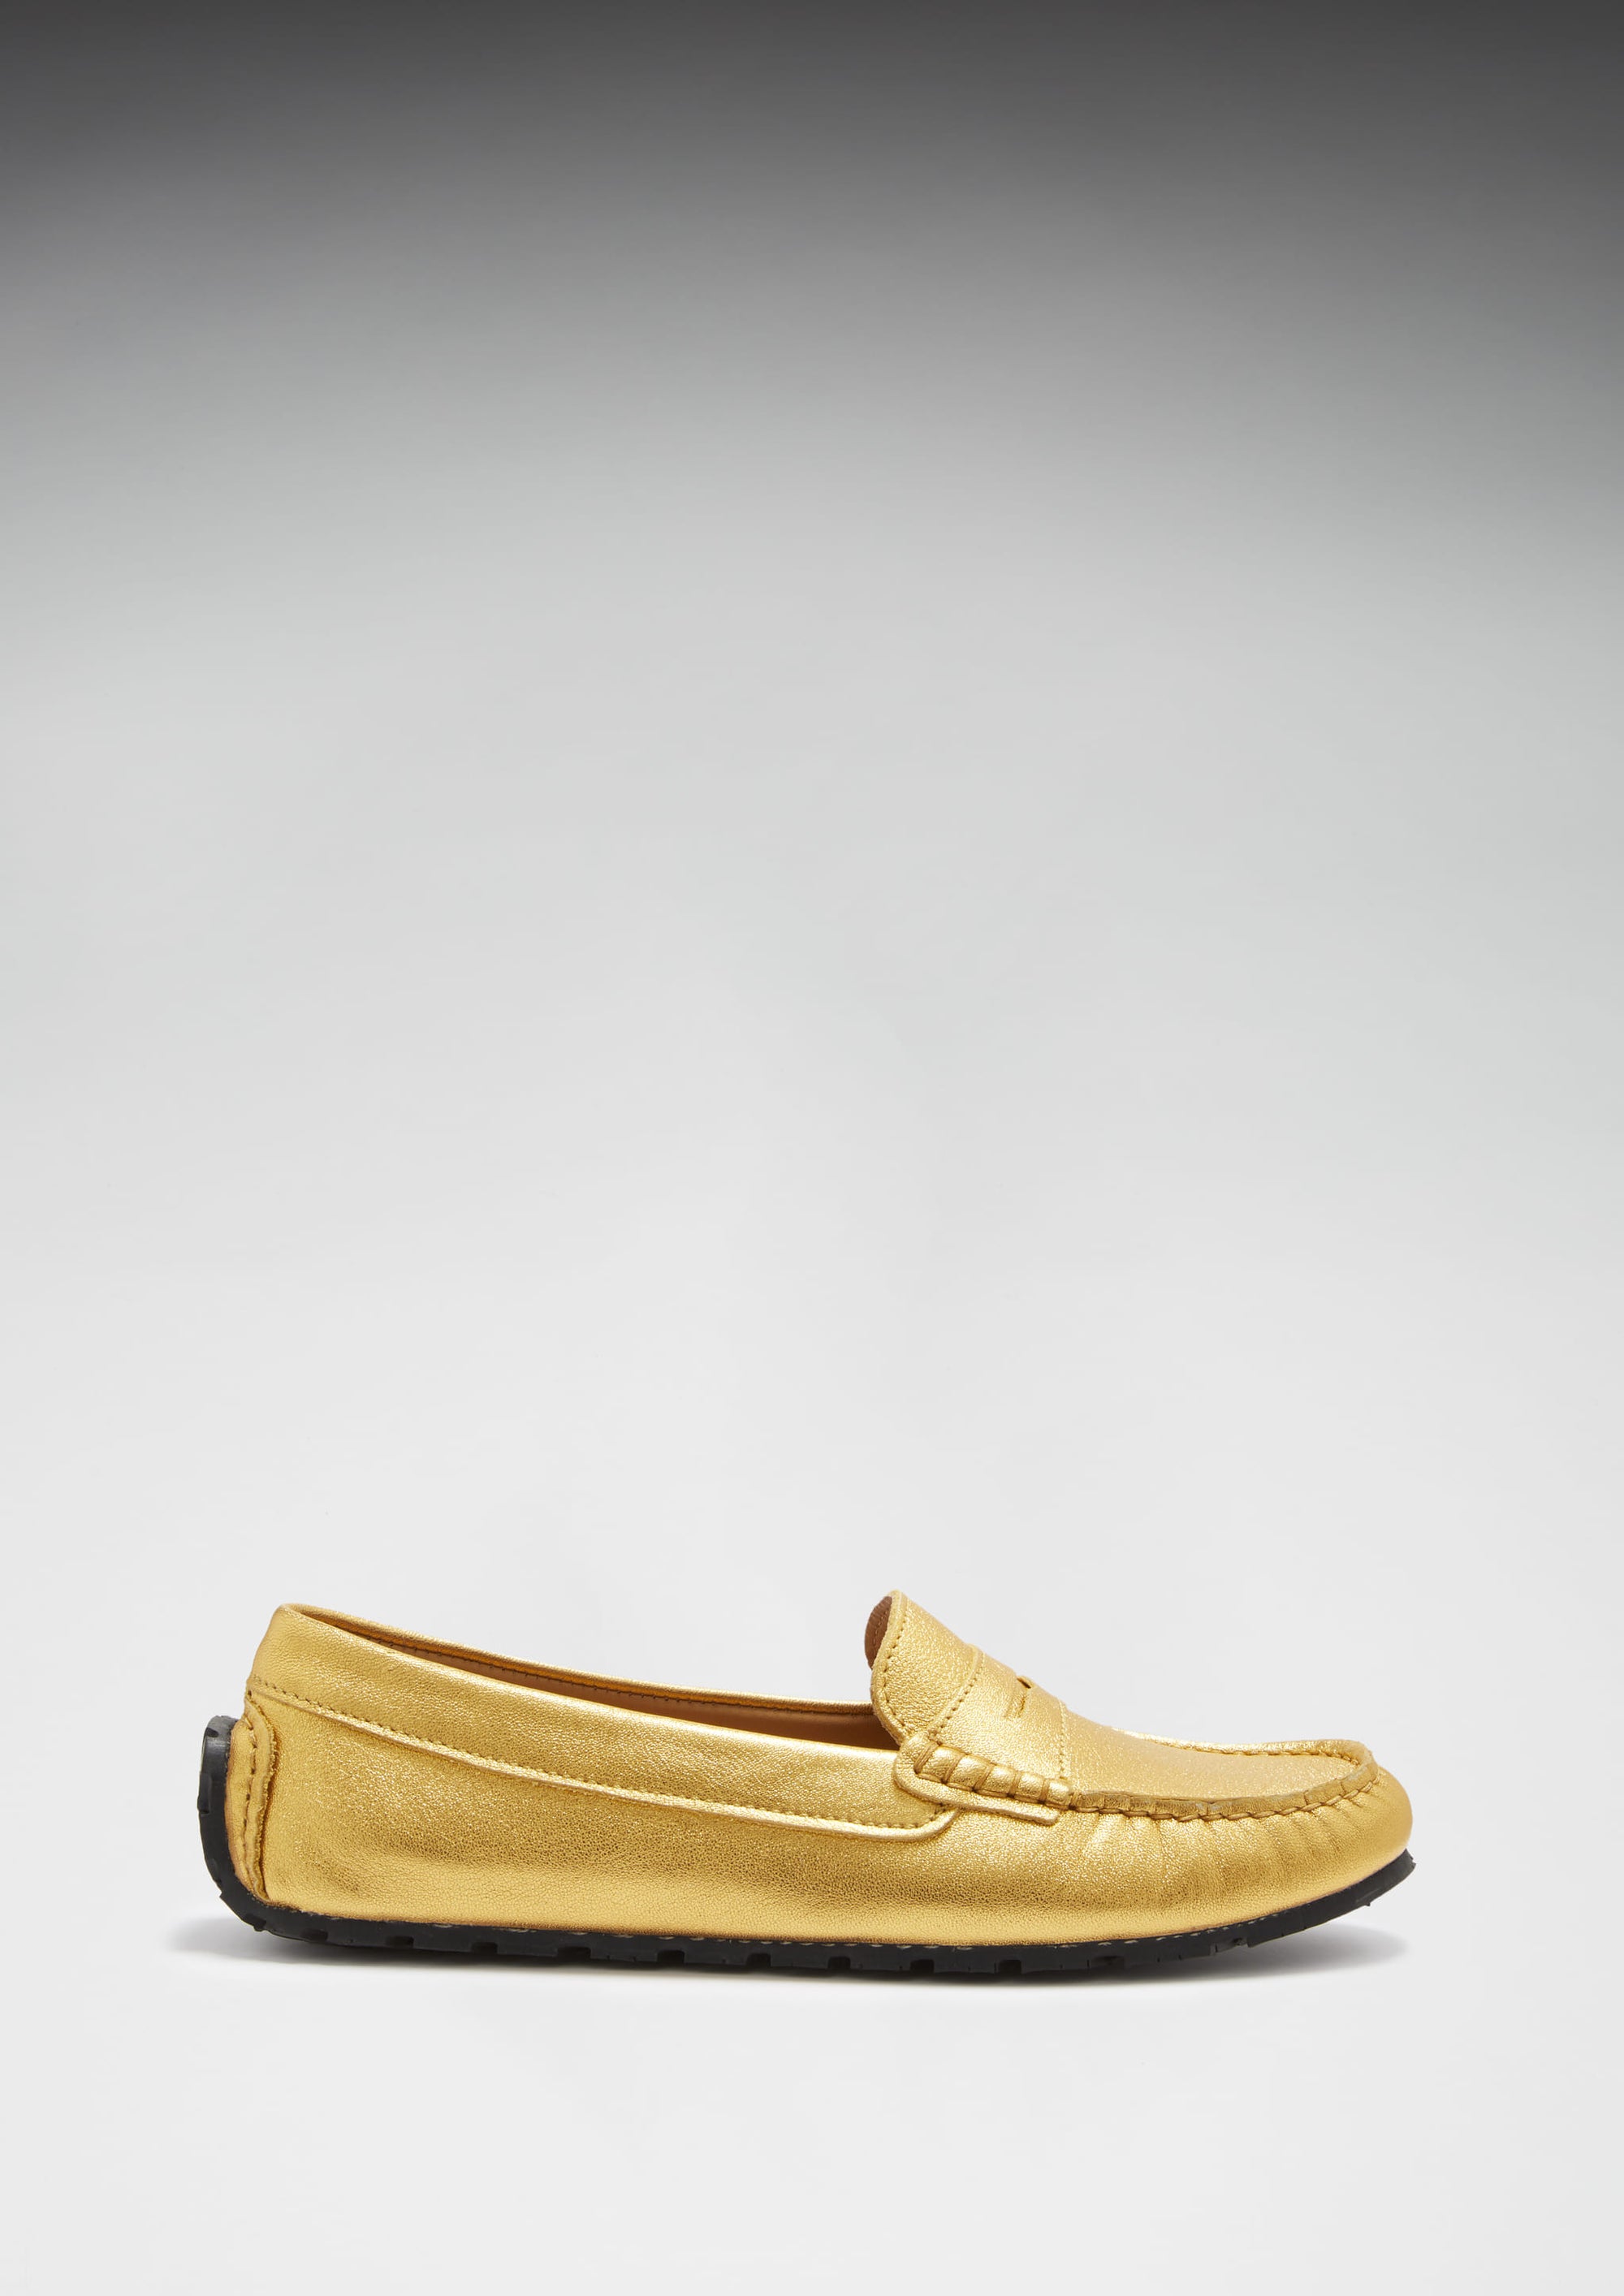 Women's Tyre Sole Penny Loafers, yellow gold leather